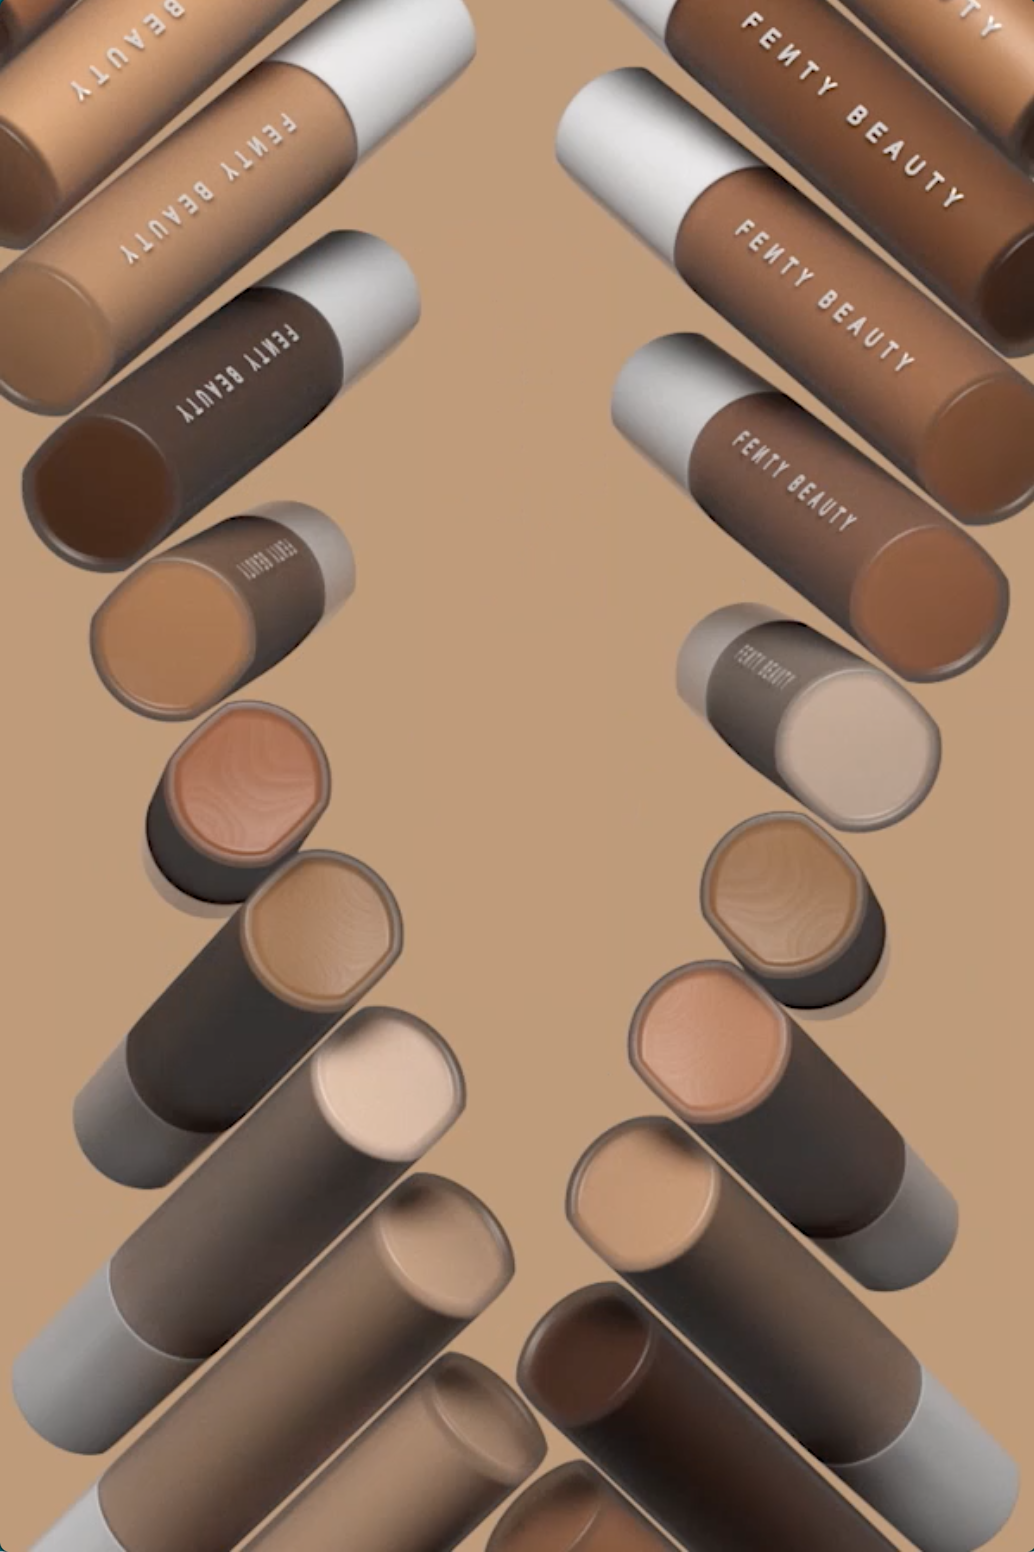 Fenty Concealer '19 V2 Video - Fenty Concealer '19 V2 Video -   18 beauty Products editorial ideas